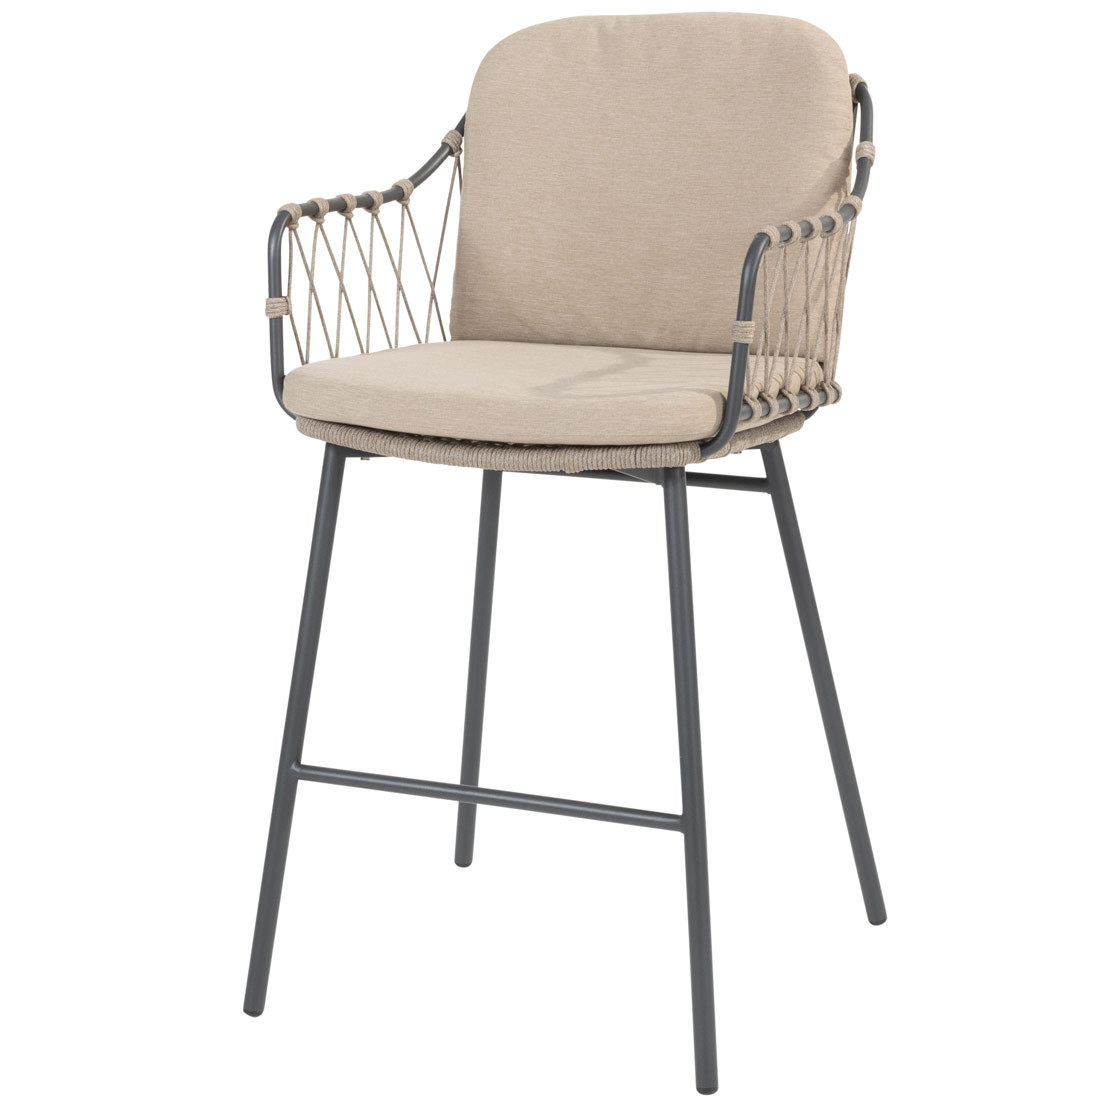 Prego bar chair Anthracite/Taupe with 2 cushions